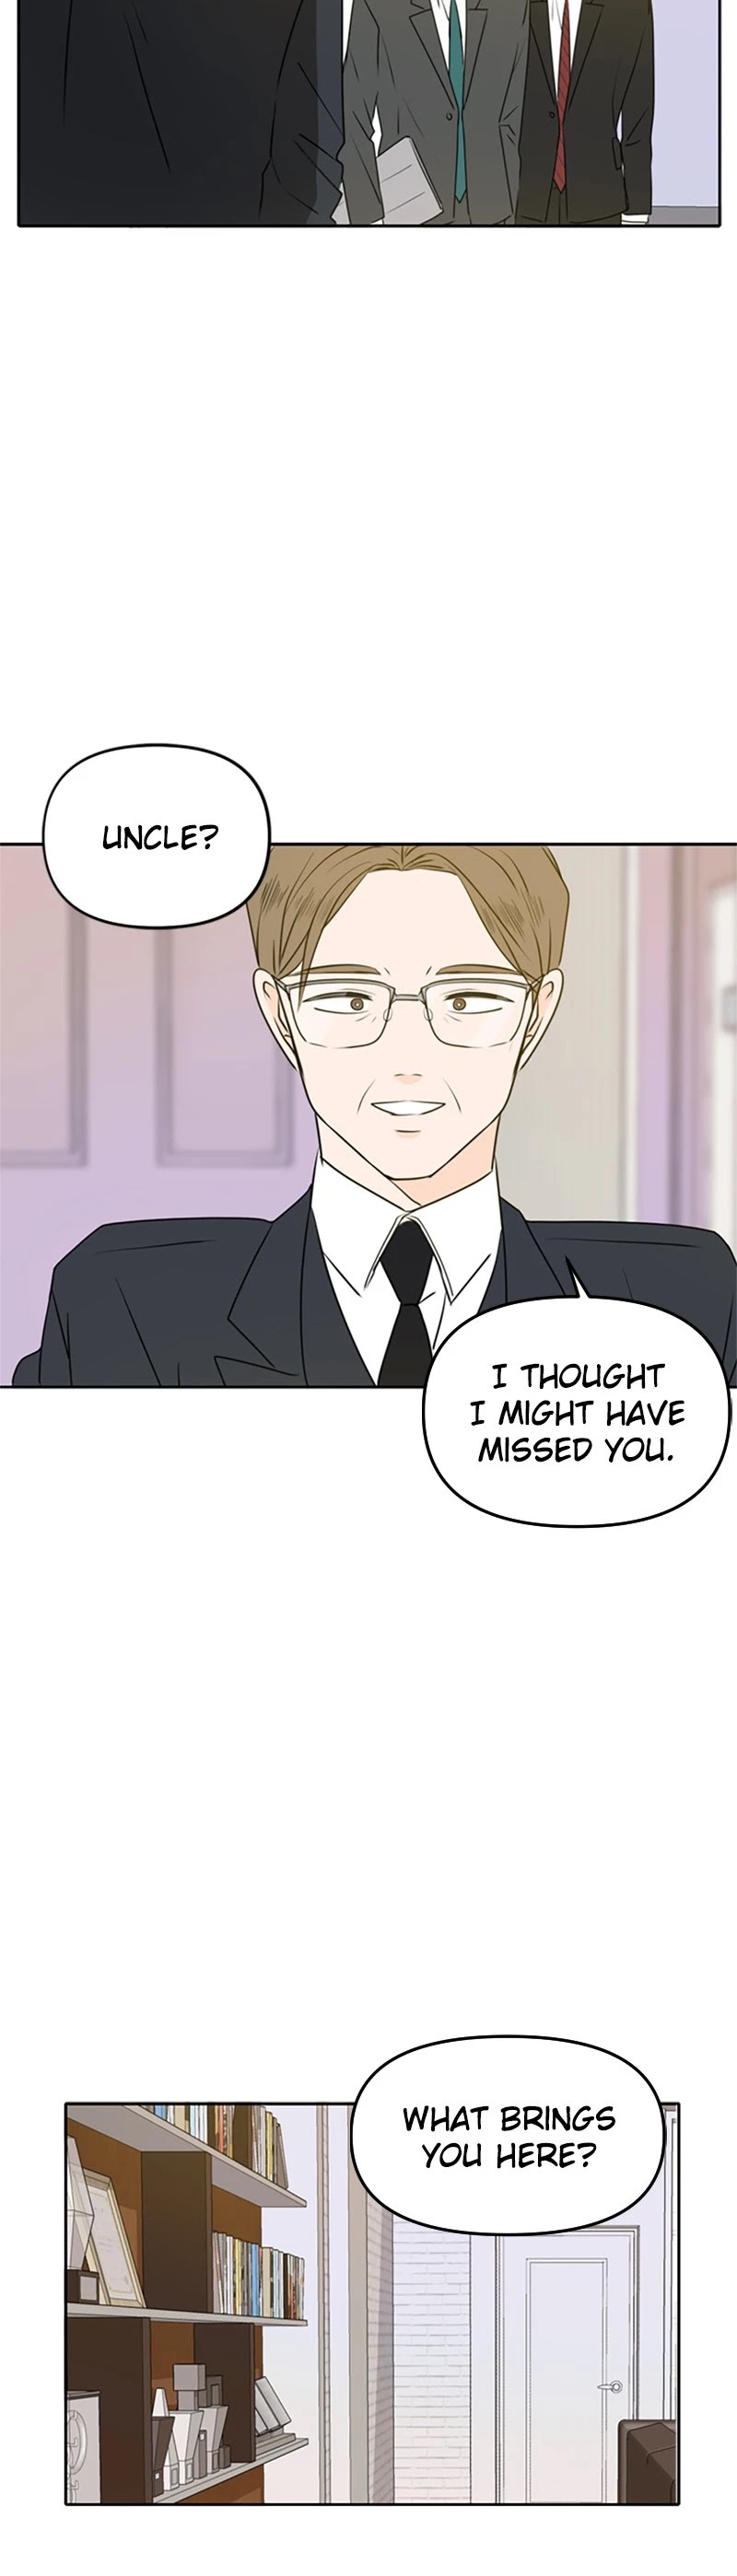 See You in My 19th Life Chapter 53 - MyToon.net